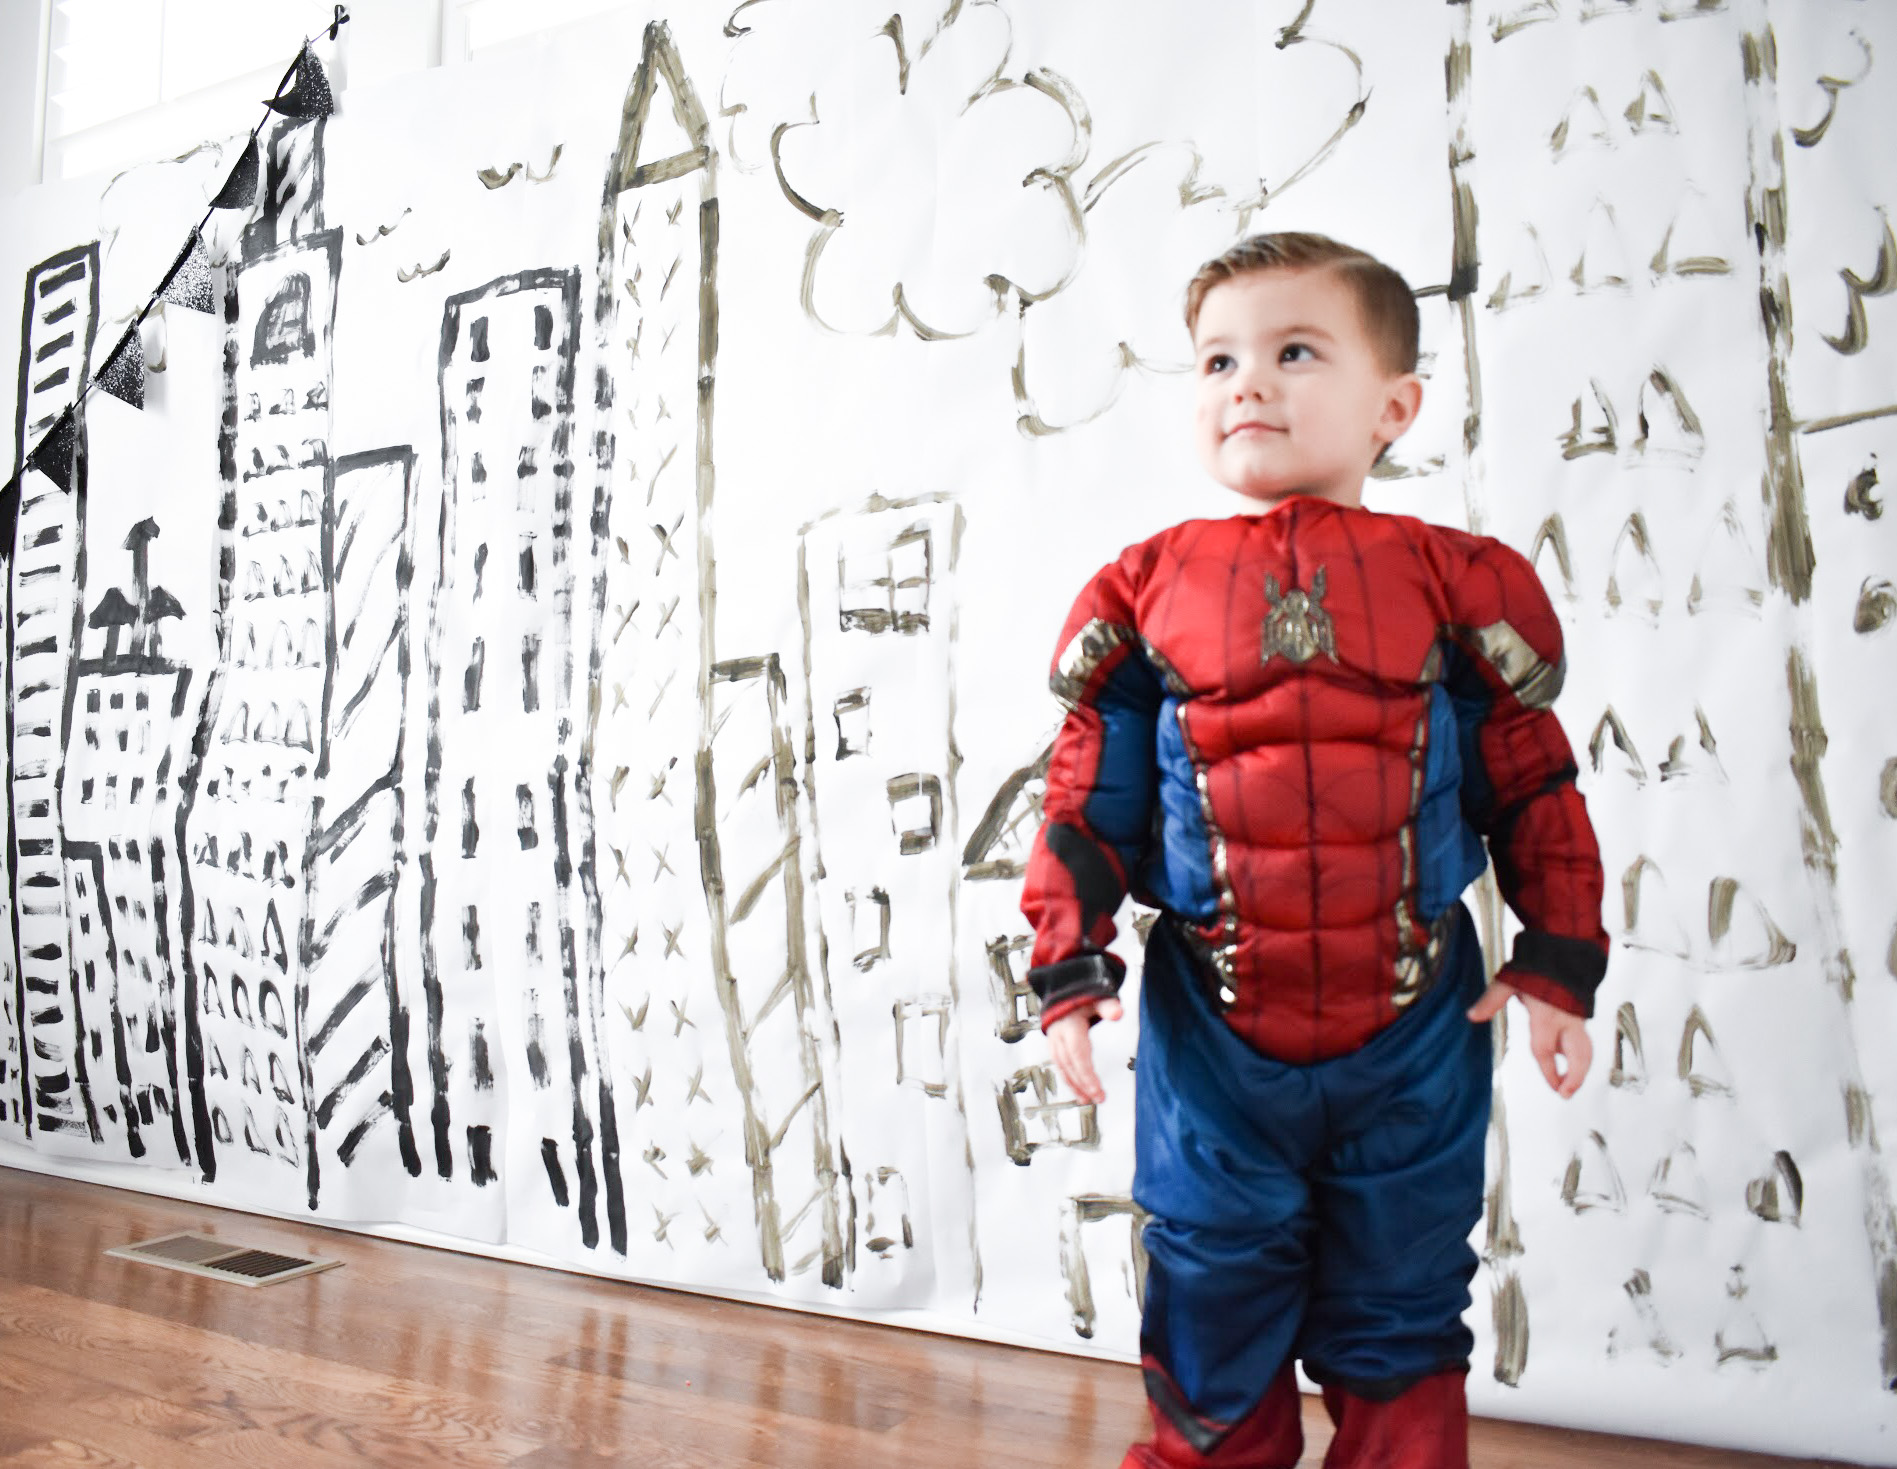 Spiderman Birthday Party - Spider-Man Party Ideas: Looking for Spiderman birthday party ideas? I pulled together some of my favorite Spider-Man birthday party ideas to create this classy Spiderman party for my favorite 3-year-old! #BirthdayParty #PartyIdeas #Spiderman #Spider-Man